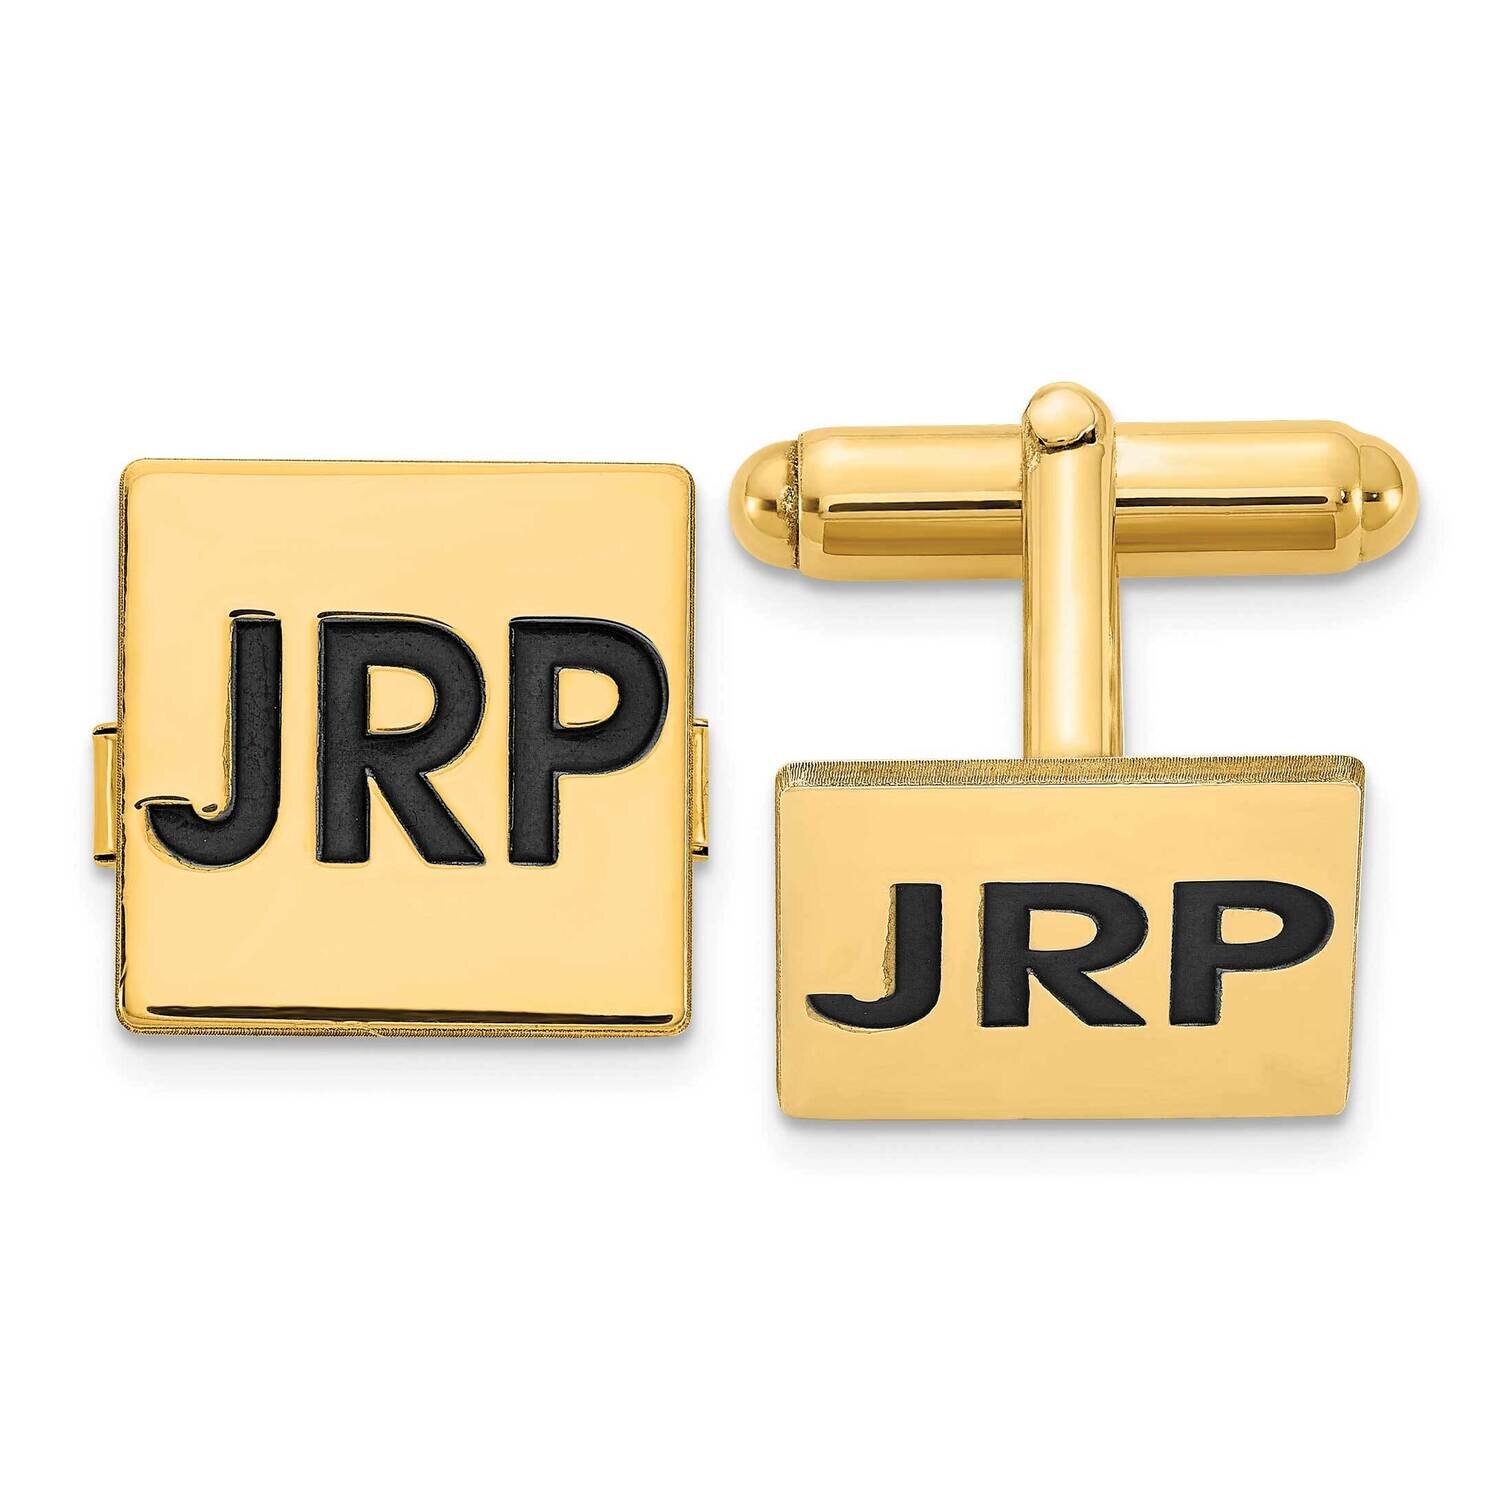 Square Epoxied Letters Monogram Cufflinks Gold-plated Sterling Silver XNA613GP